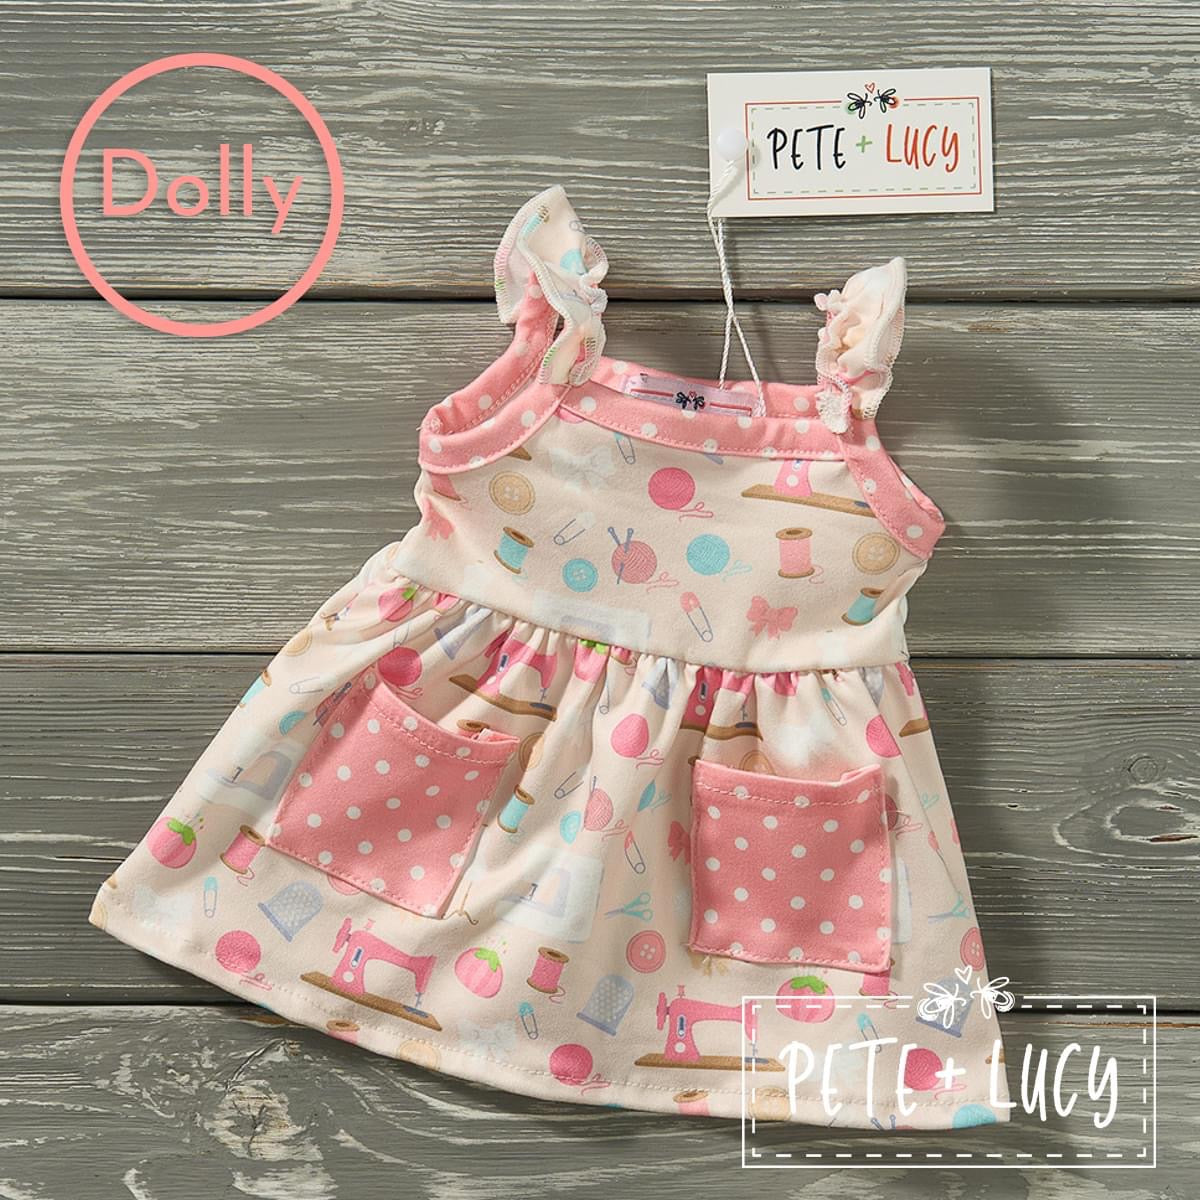 Susie’s Sewing Kit Dolly Dress by Pete and Lucy